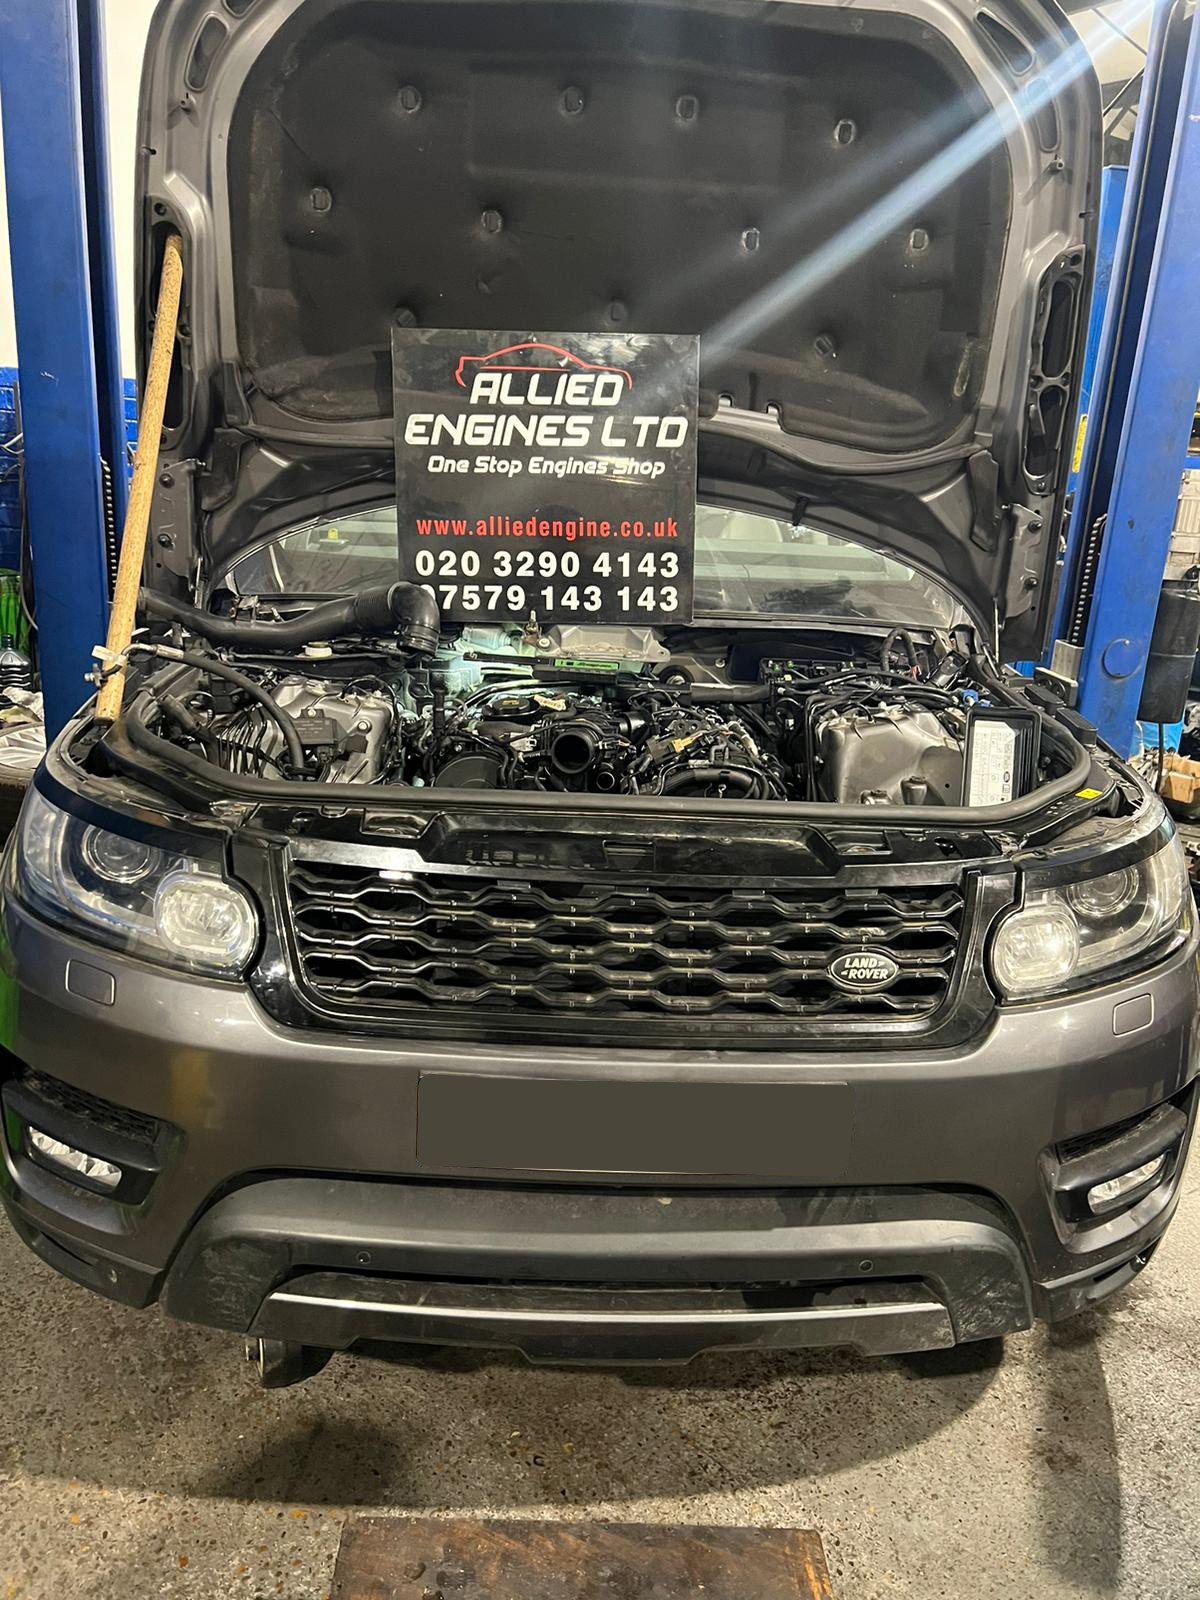 Range Rover 306DT Engine Replacement